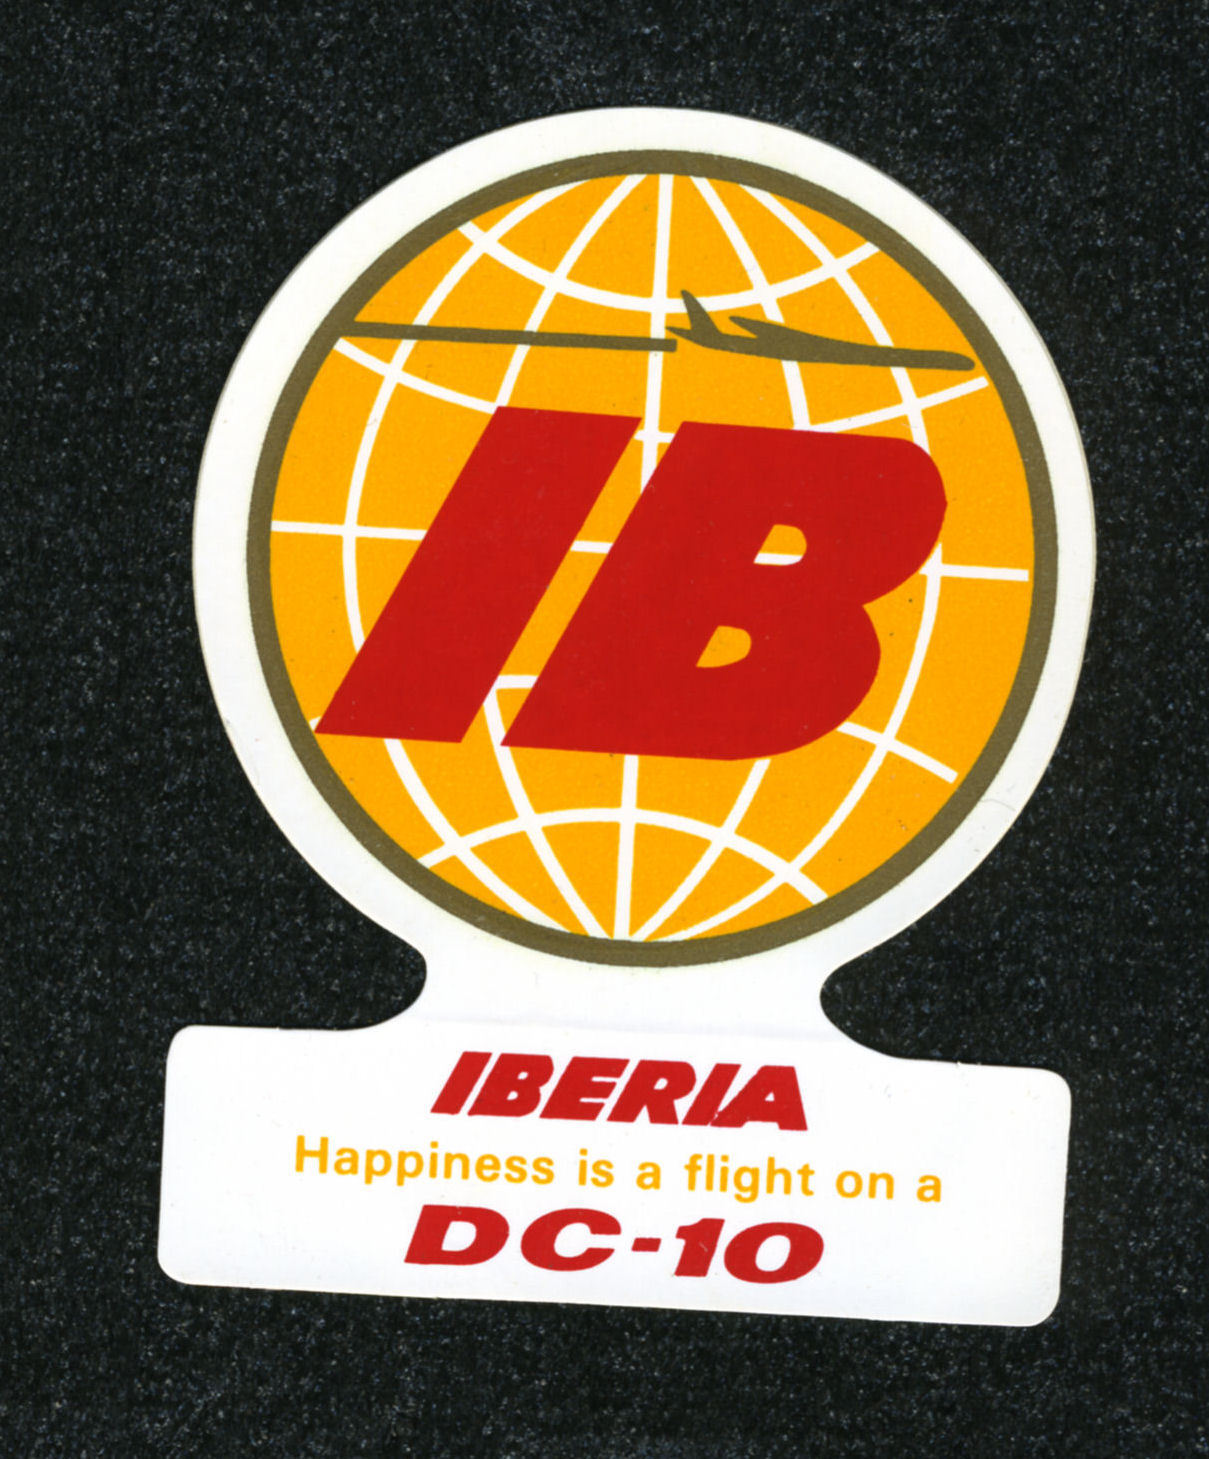 DC-10 IBERIA AIRLINES STICKER - HAPPINESS IS A FLIGHT IN AN IBERIA DC-10 LABEL